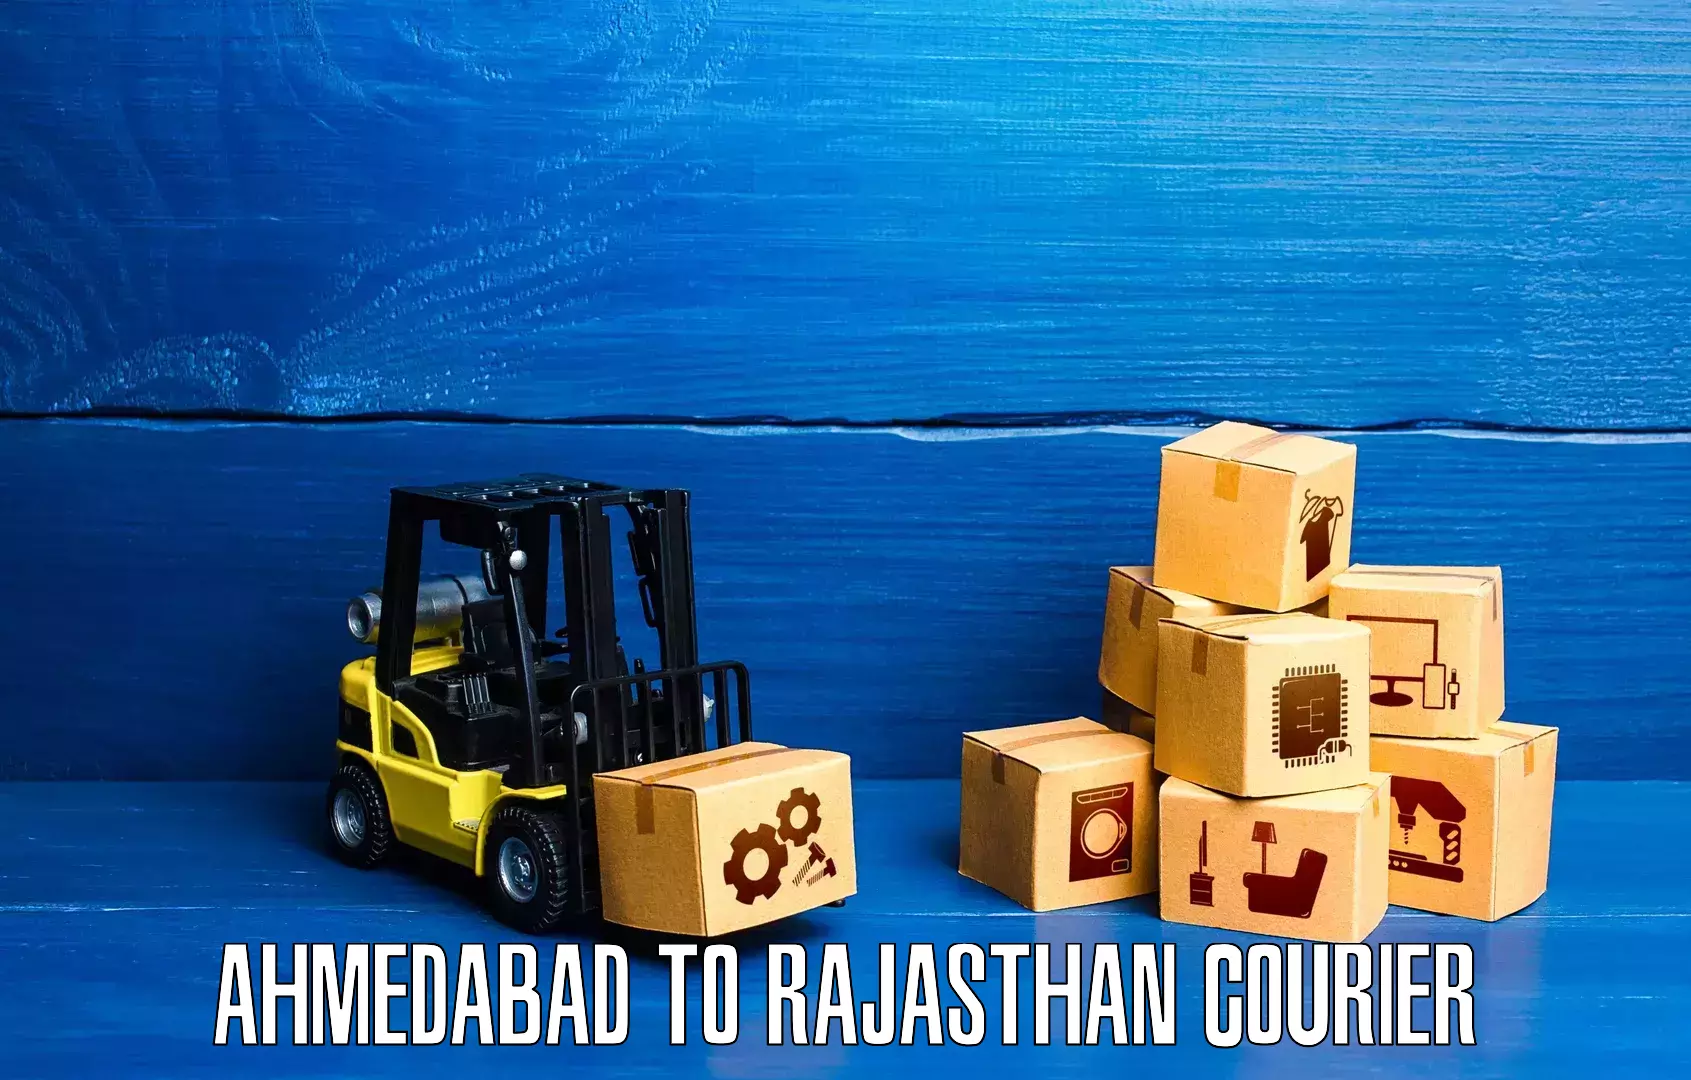 Courier service innovation Ahmedabad to Nagar